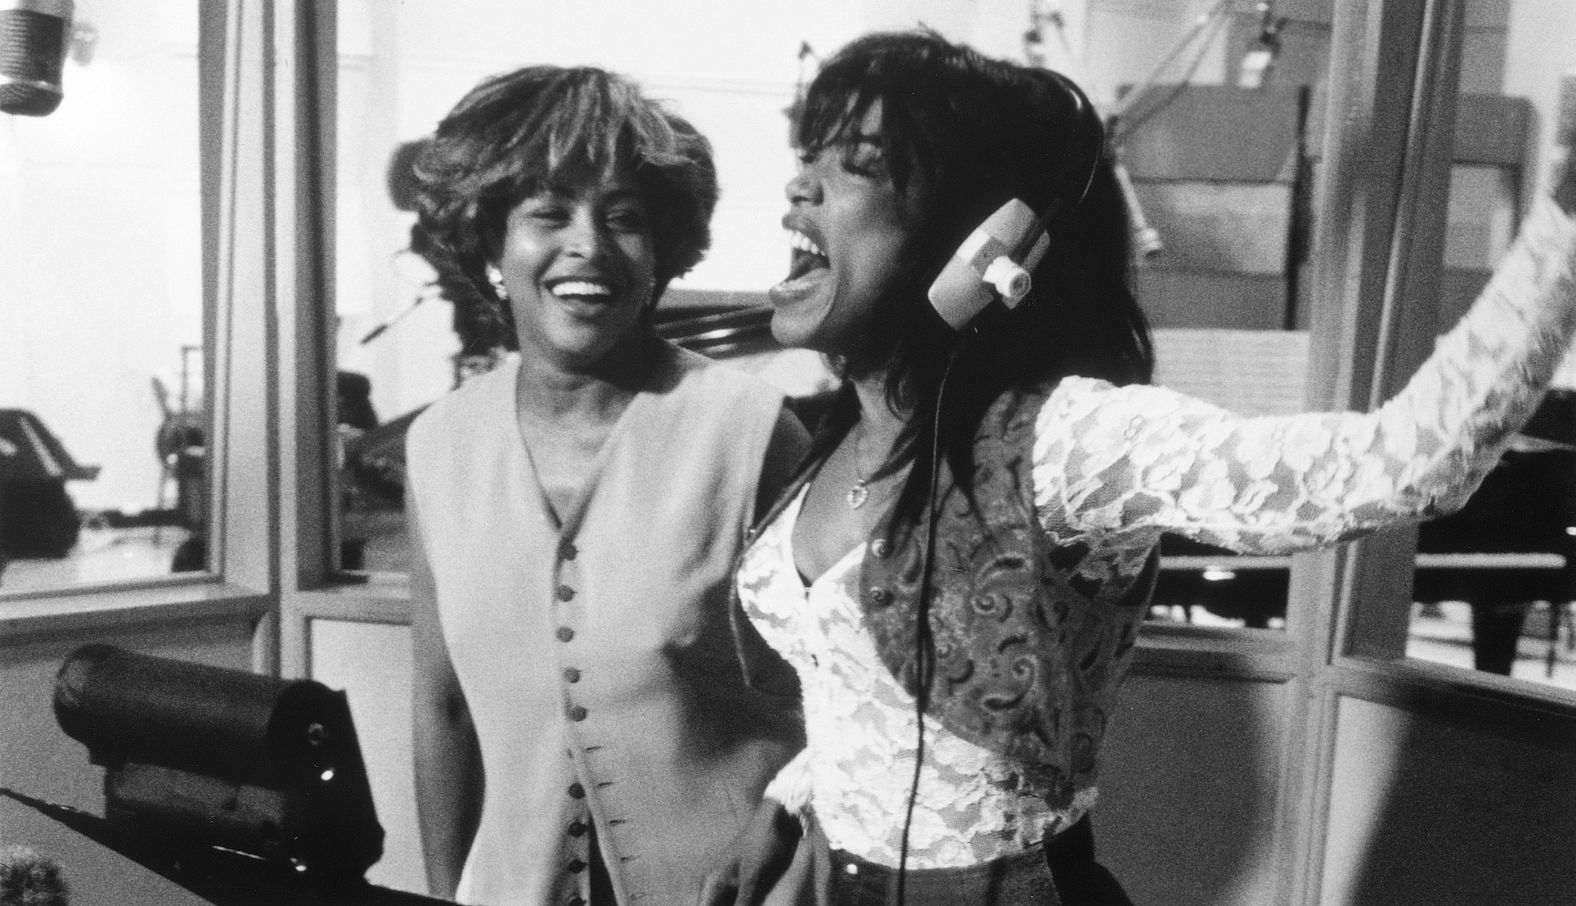 Turner, left, and actress Angela Bassett rehearse a performance as Bassett portrayed her in the 1993 film "What's Love Got to Do With It." Bassett was nominated for an Academy Award and won the Golden Globe Award for best actress.